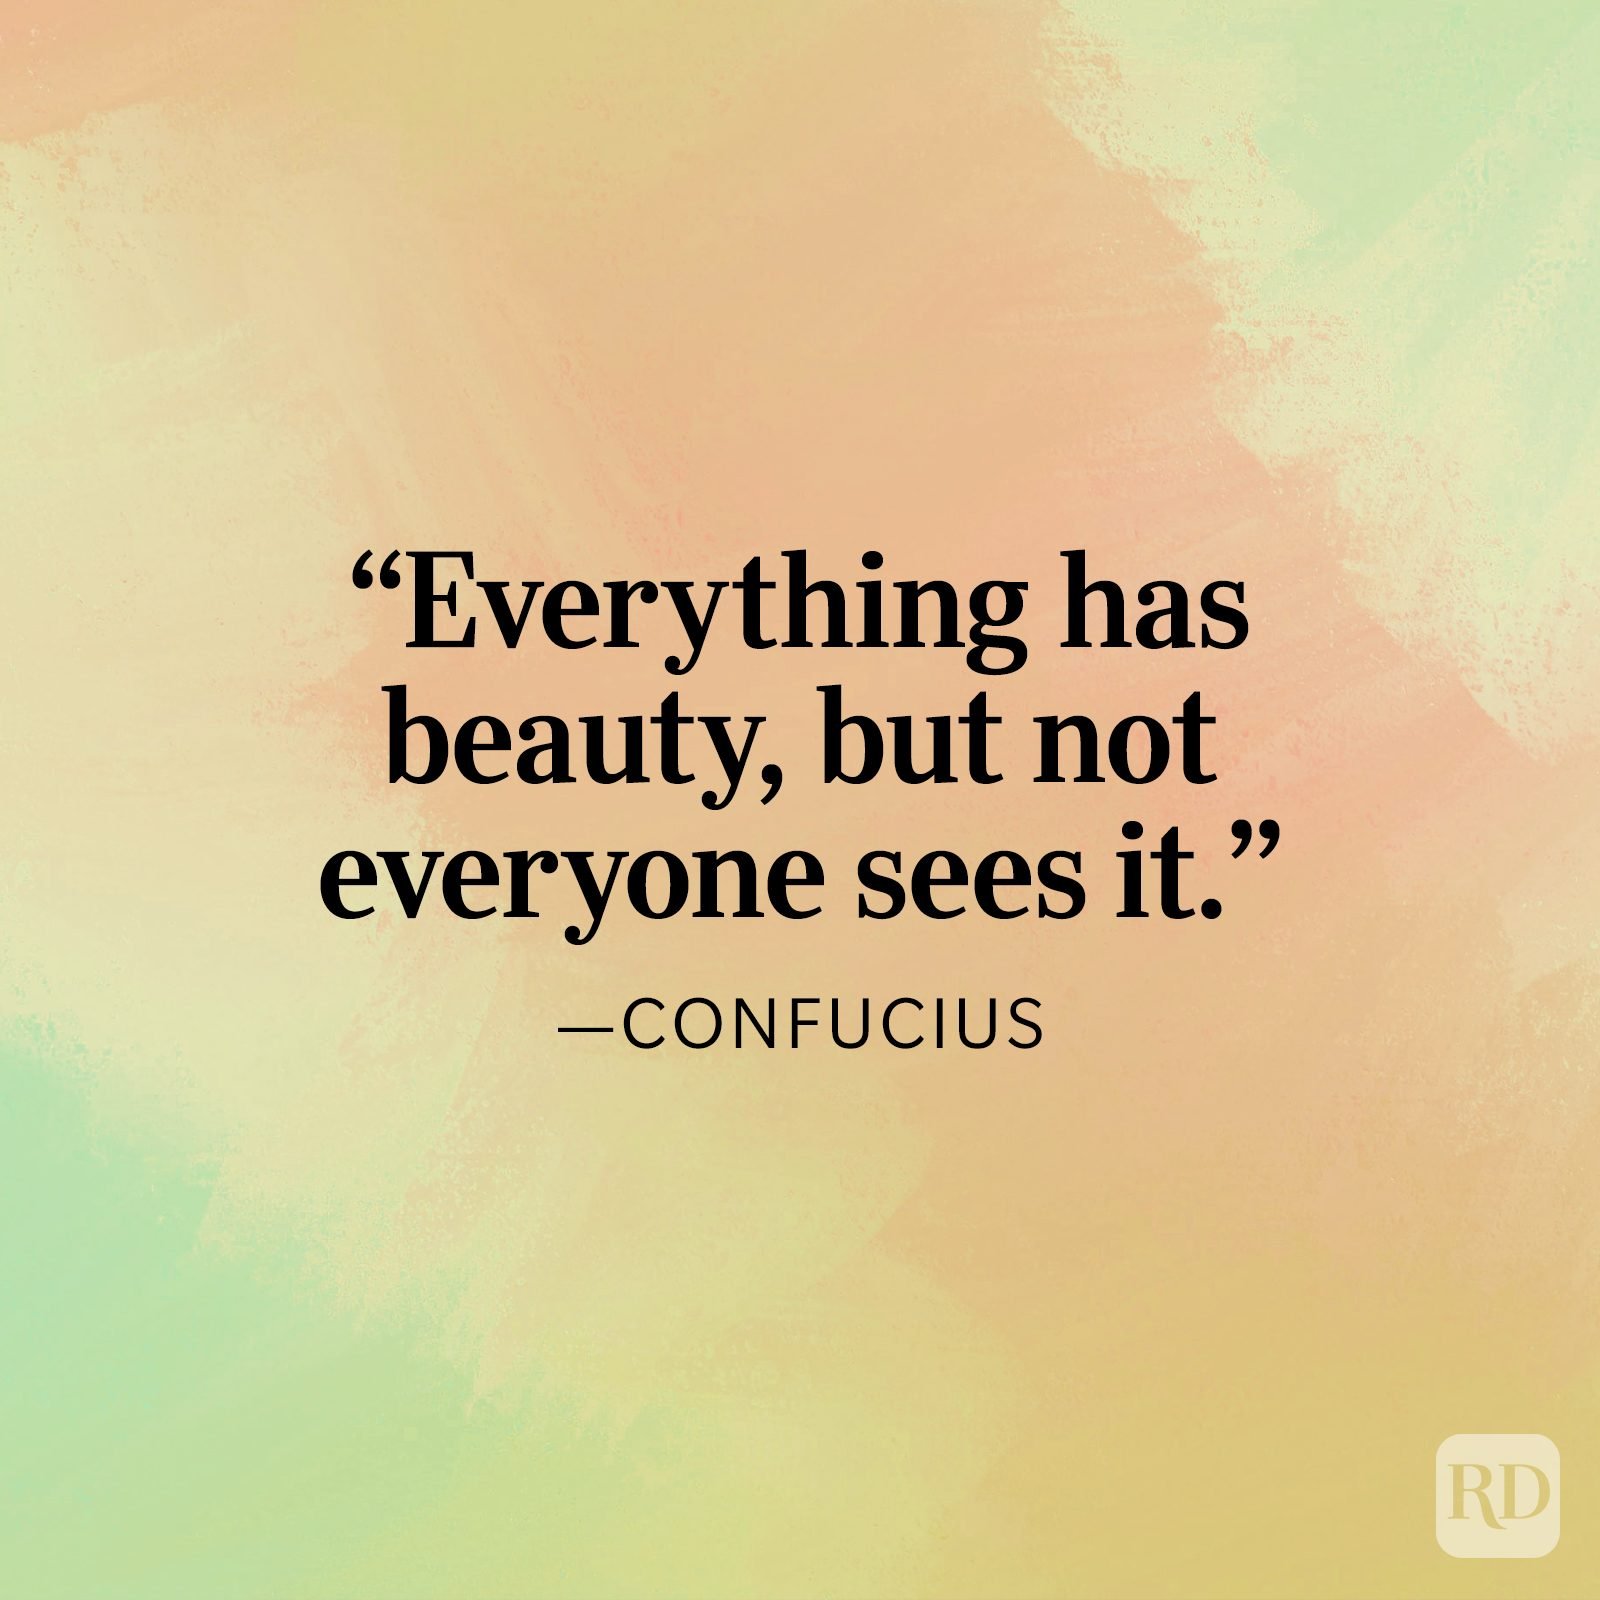 https://www.rd.com/wp-content/uploads/2022/01/everything-has-beauty-confucius-quote.jpg?fit=700%2C1024